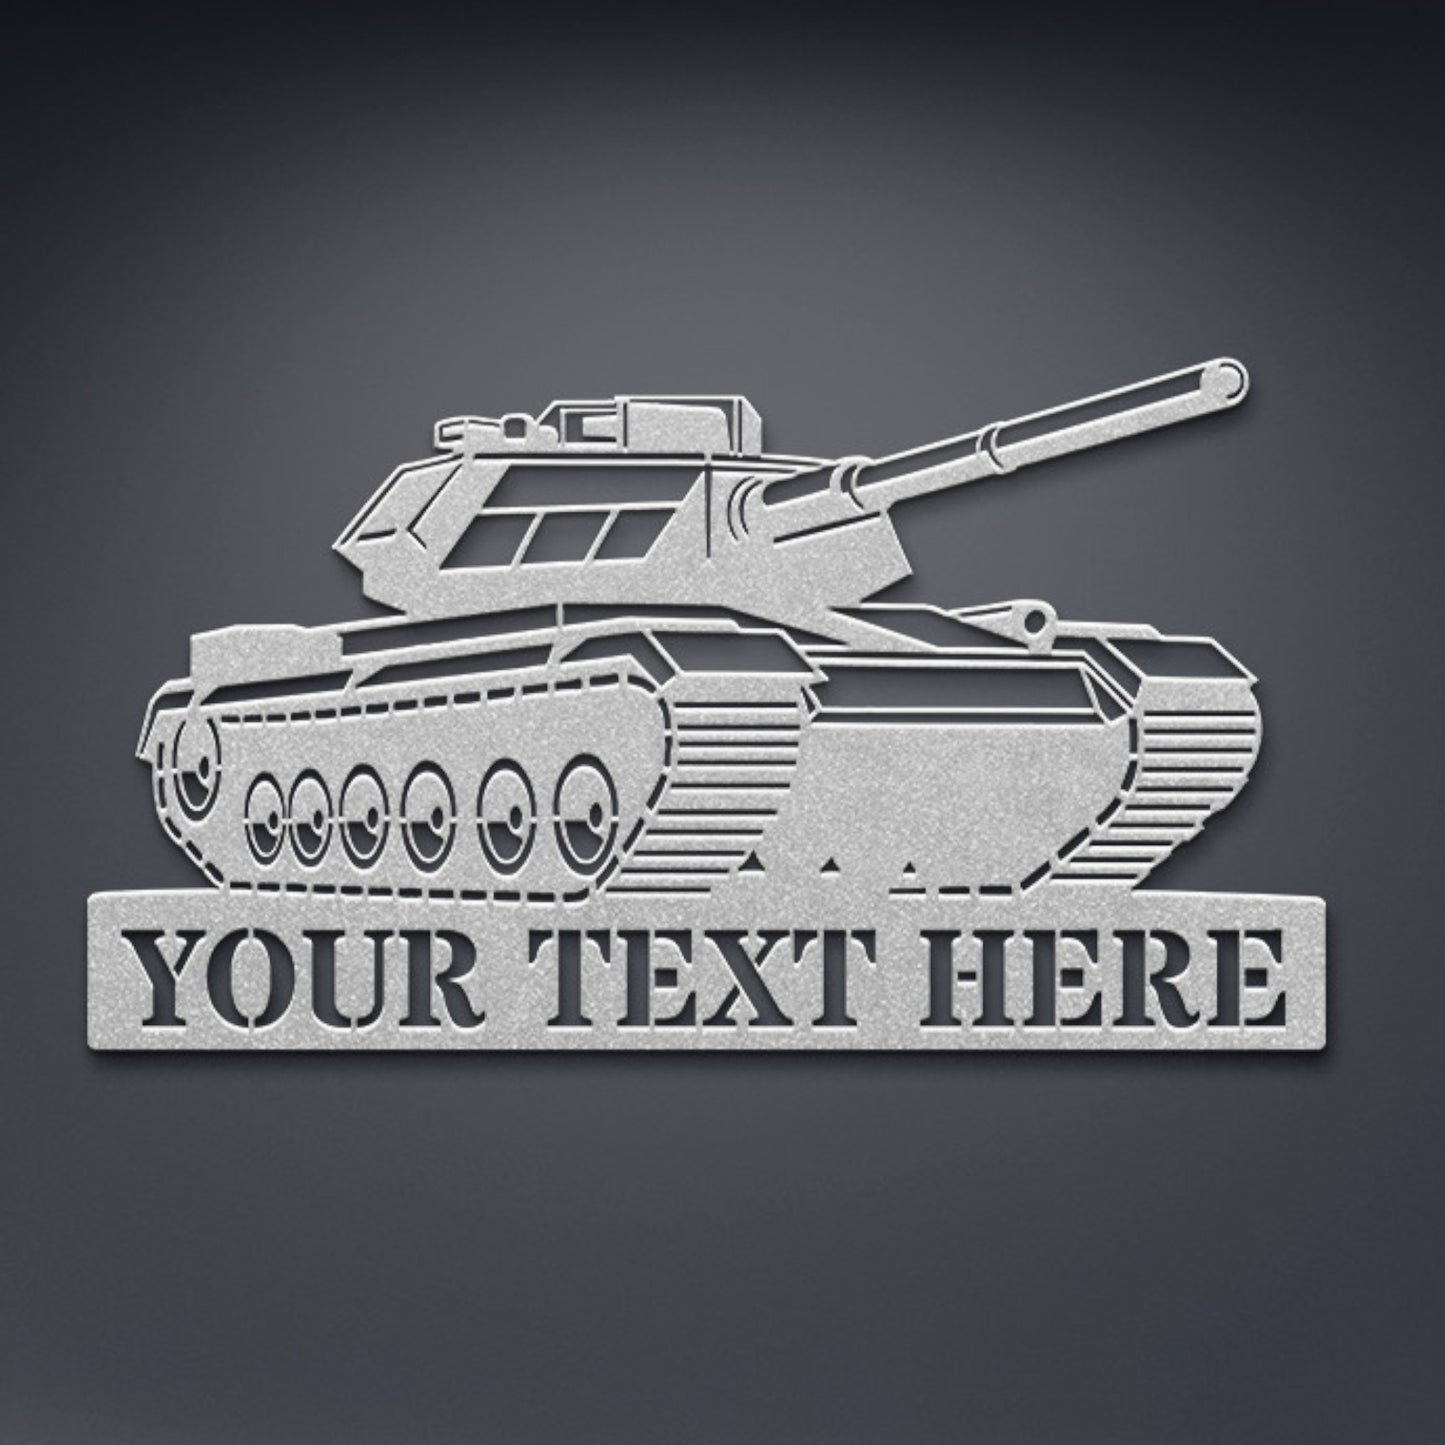 Personalized Military Battle Tank Metal Sign. Custom Combat Vehicle Army Wall Decor Gift. Patriotic Veteran Wall Hanging. Armed Forces Decor